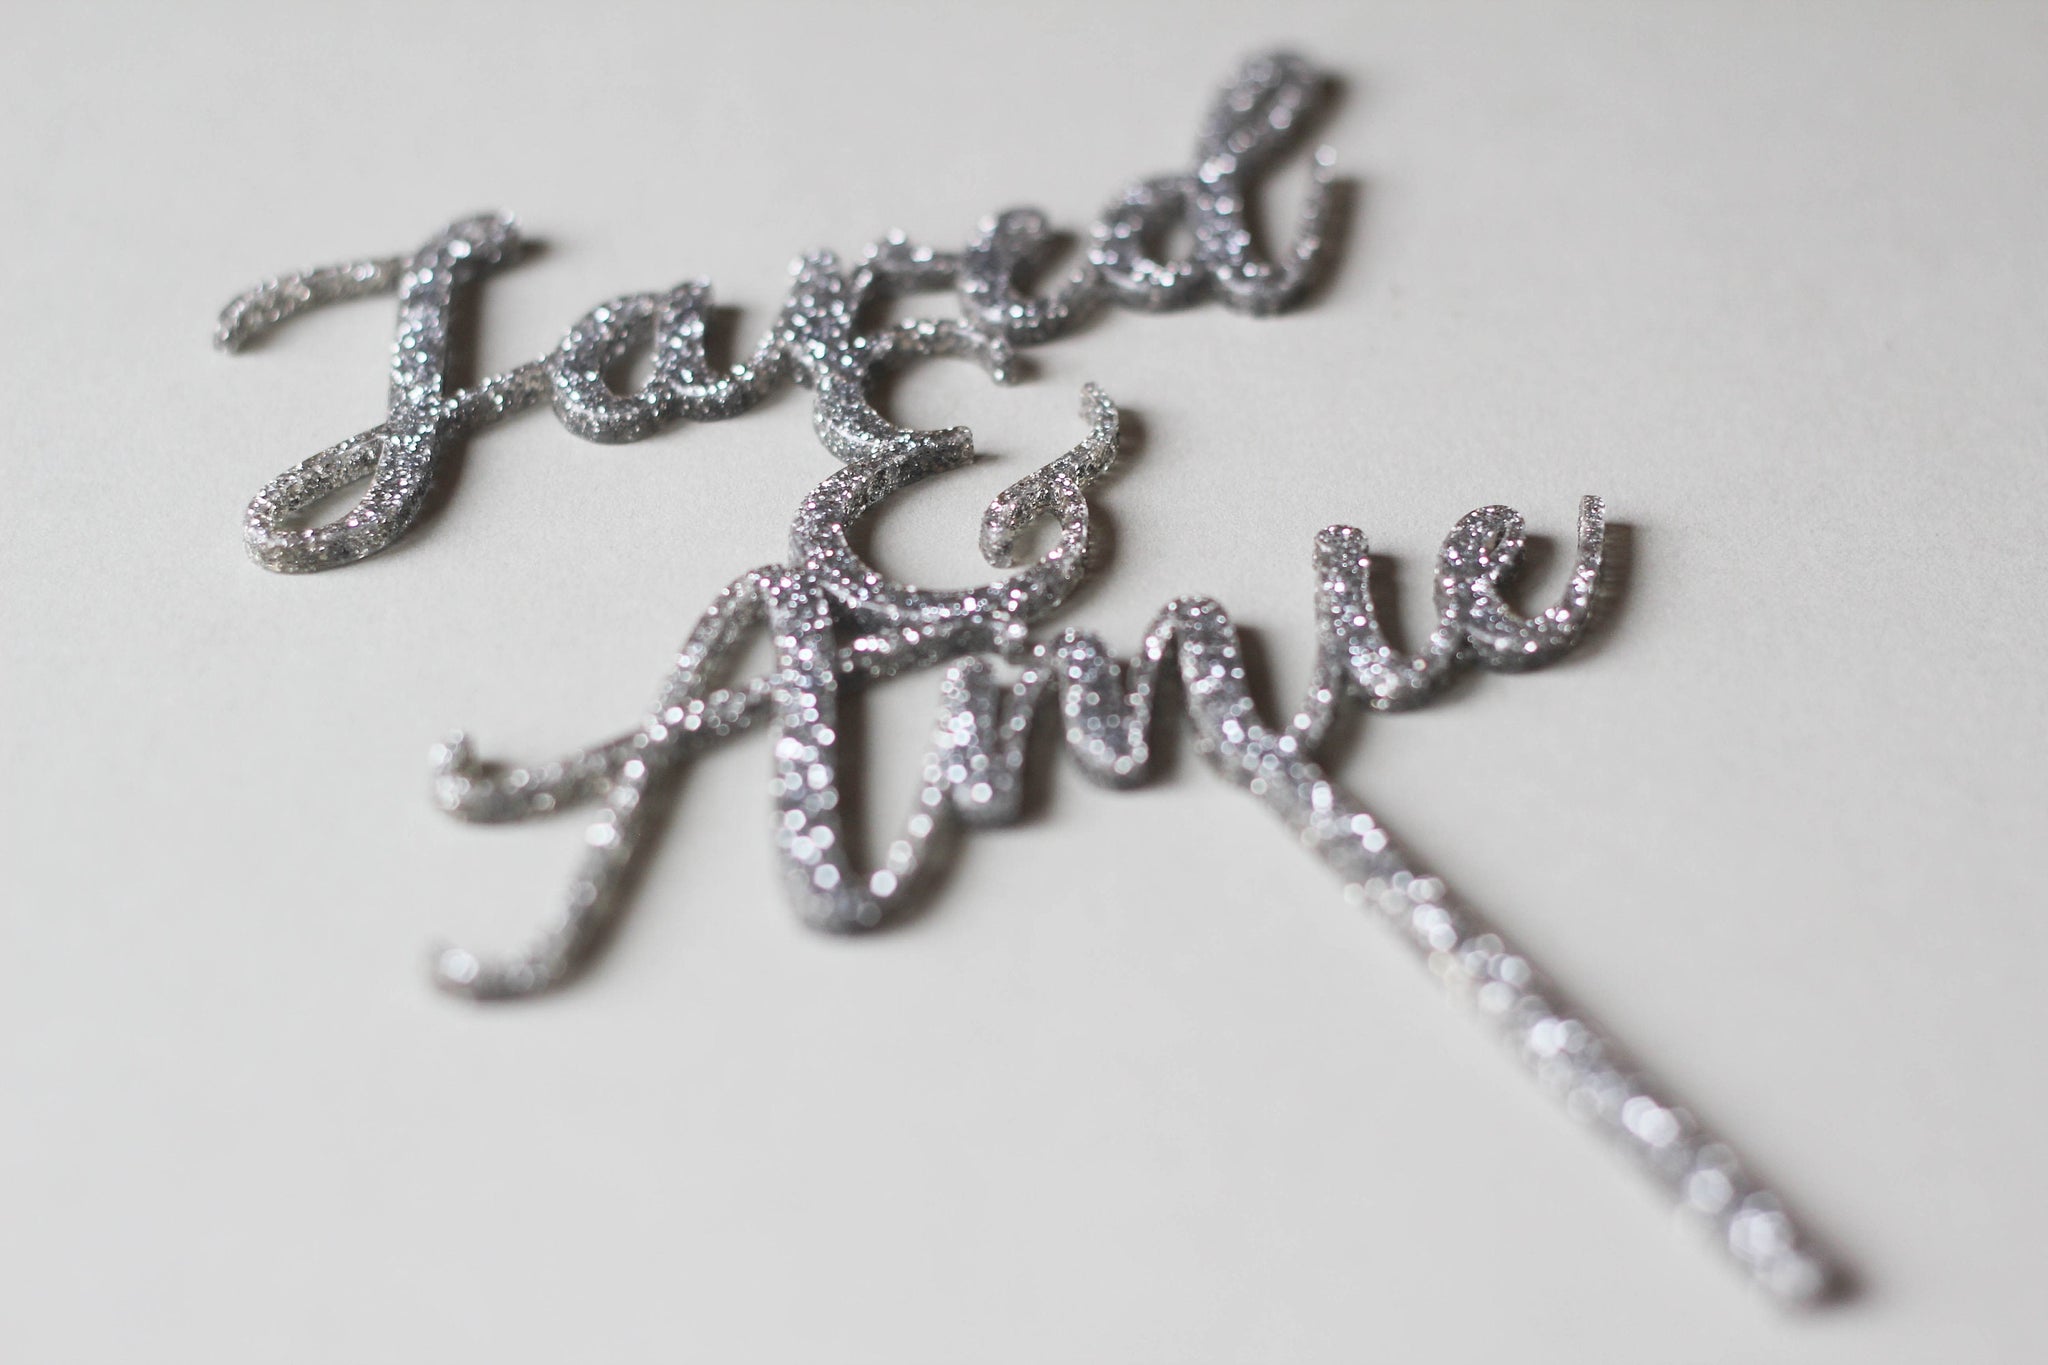 Cursive Wedding Cake Topper Featuring The Wedding Pairs Names